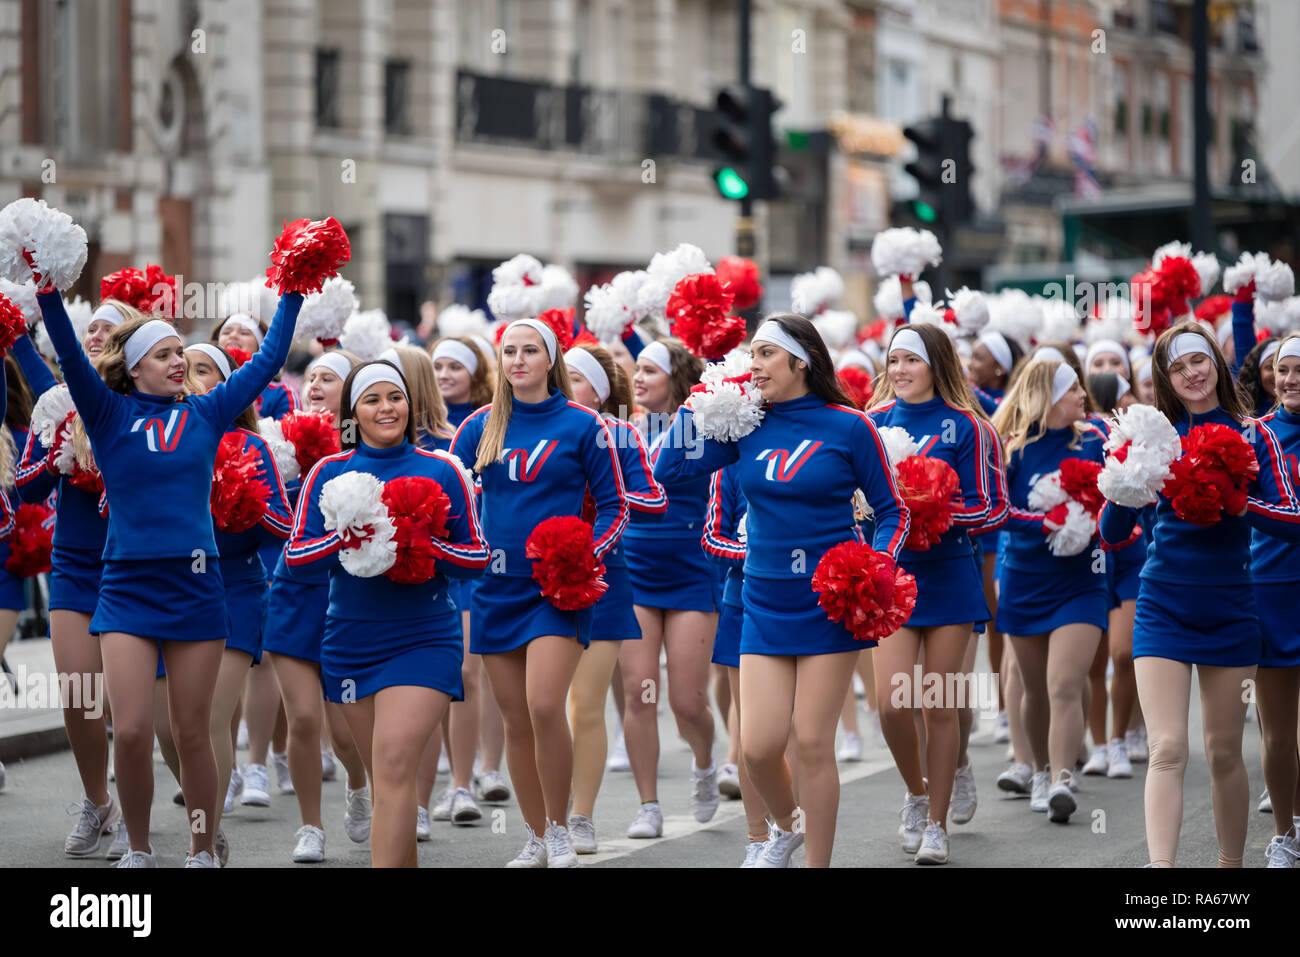 London, UK.  1 January 2019.   The theme of the parade this year was “London Welcomes the World”. With thousands of performers from a multitude of different countries and cultures from all around the world parade through central  London. Acts included Varsity Spirit All-American Universal and National Cheerleaders Association.  Credit: Ilyas Ayub / Alamy Live News Stock Photo